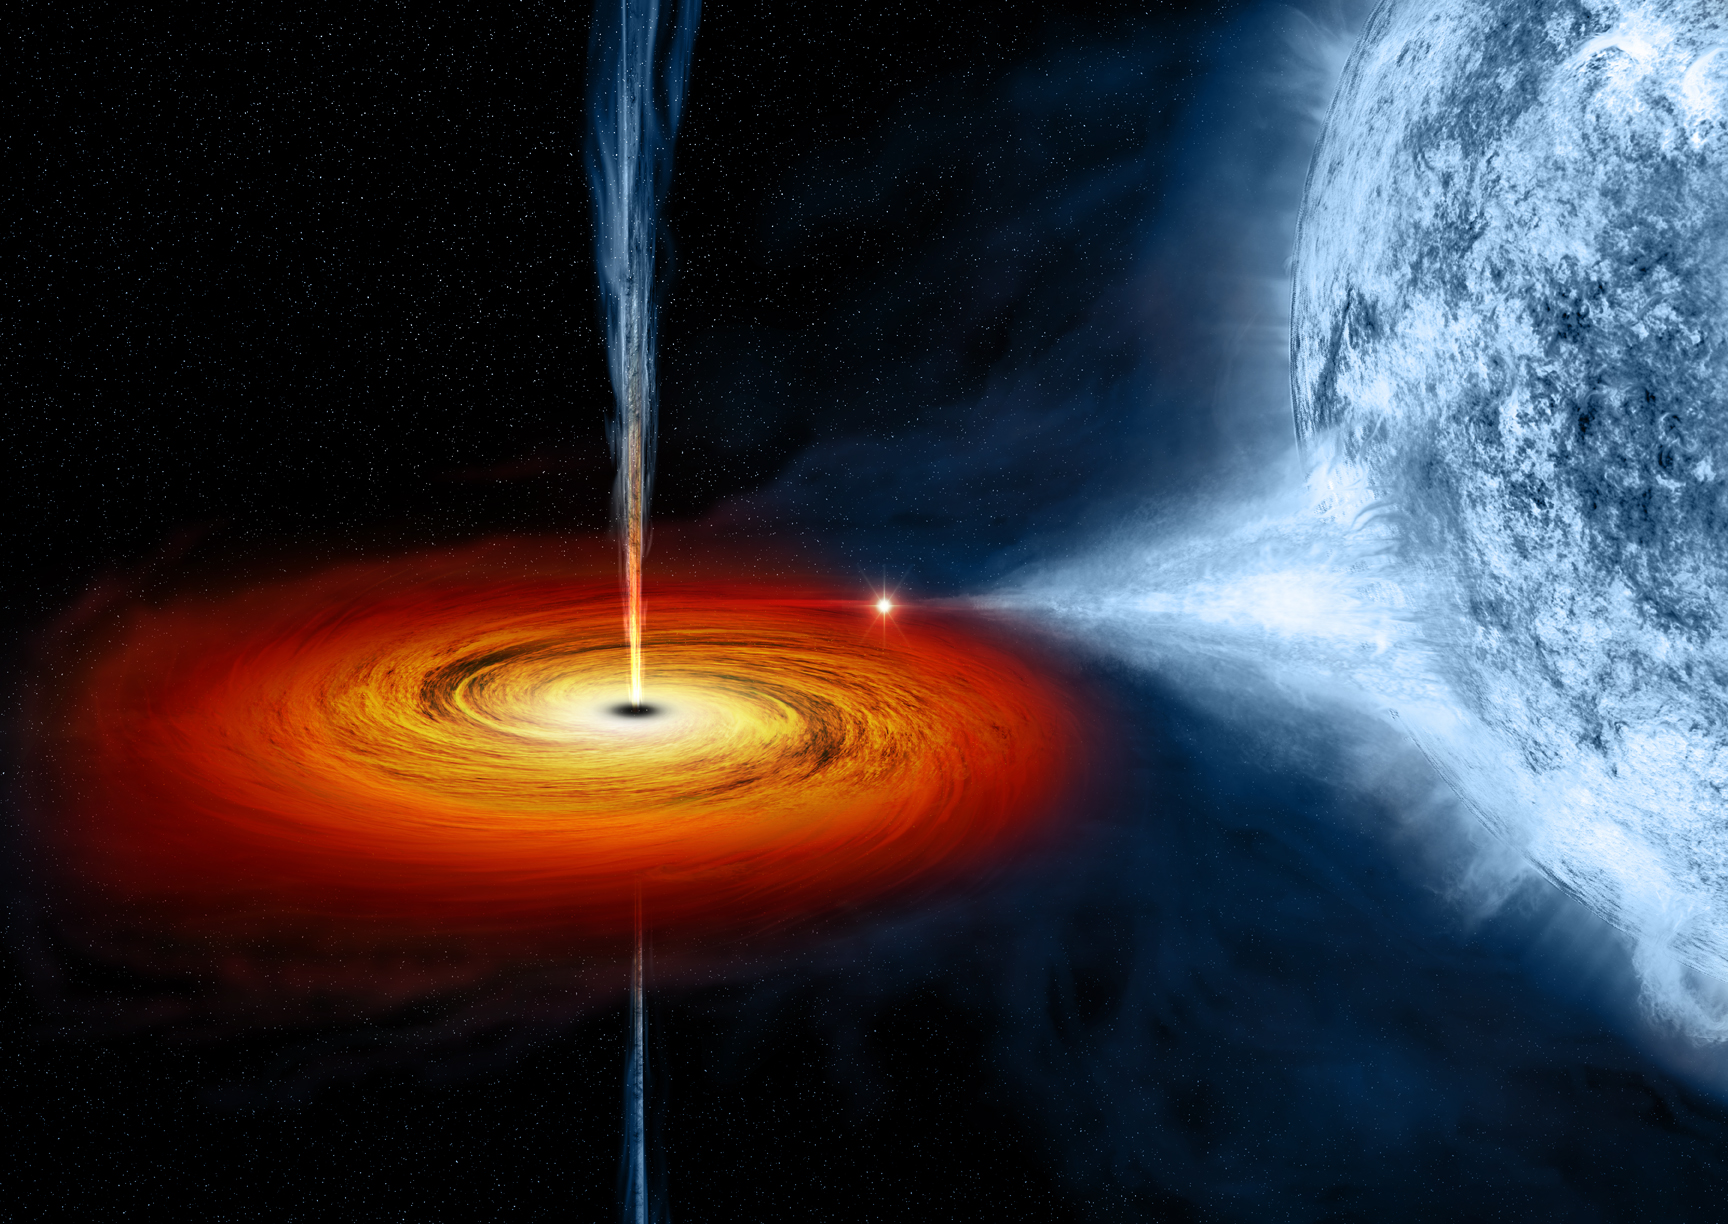 The image is an artistic depiction of a black hole consuming the mass of a star. The outer layers of the Black Hole show a deep red, the middle layers show an orange glow, and the centre is a bright while, followed by a sharp black dot right in the centre. the star being consumed is an azure blue, with only its outer layer being drawn into the black hole..